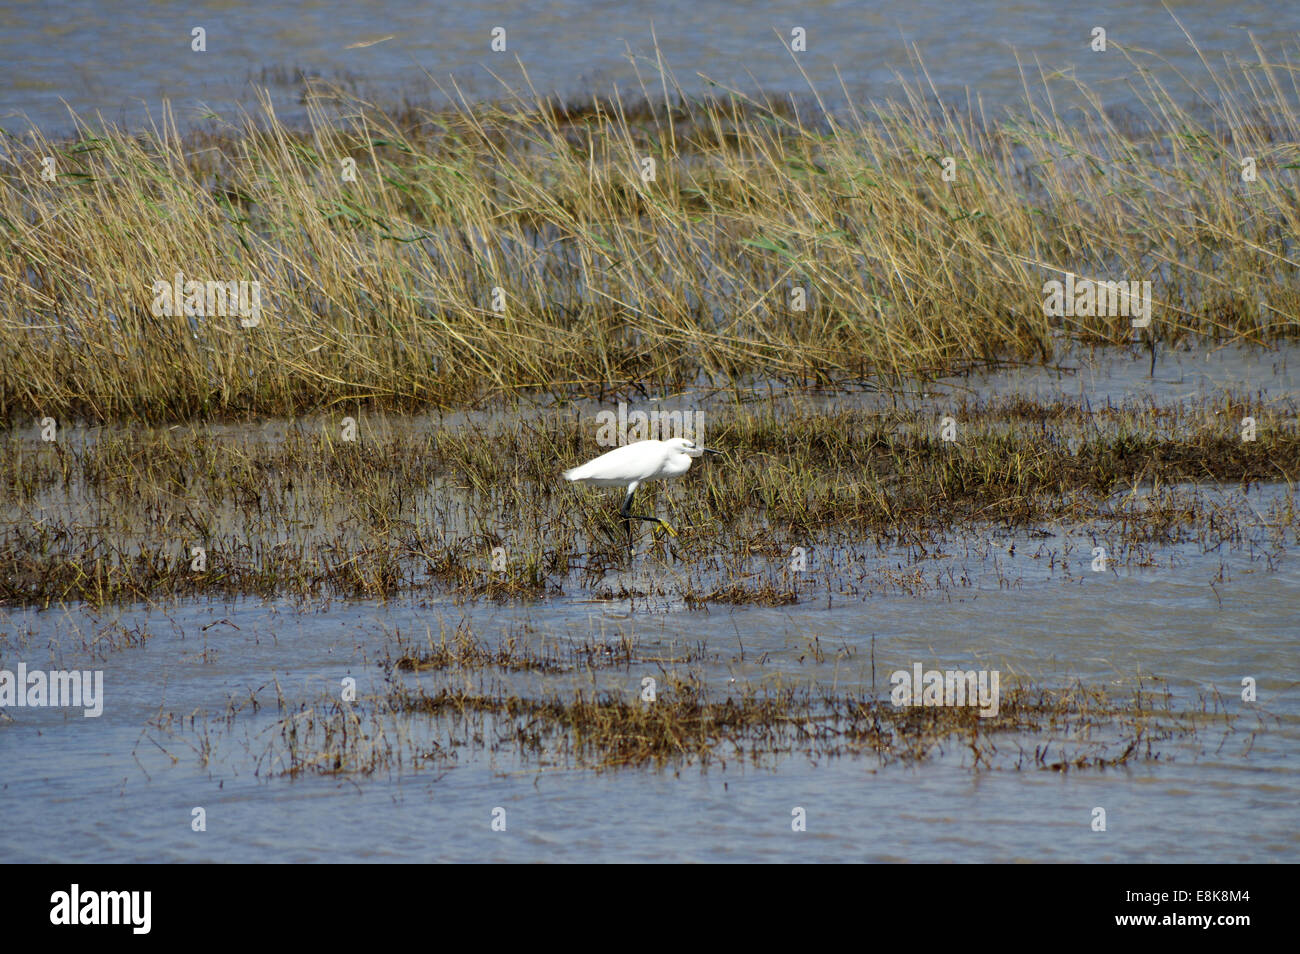 Little egret at Western shores of Lake St. Lucia, South Africa Stock Photo